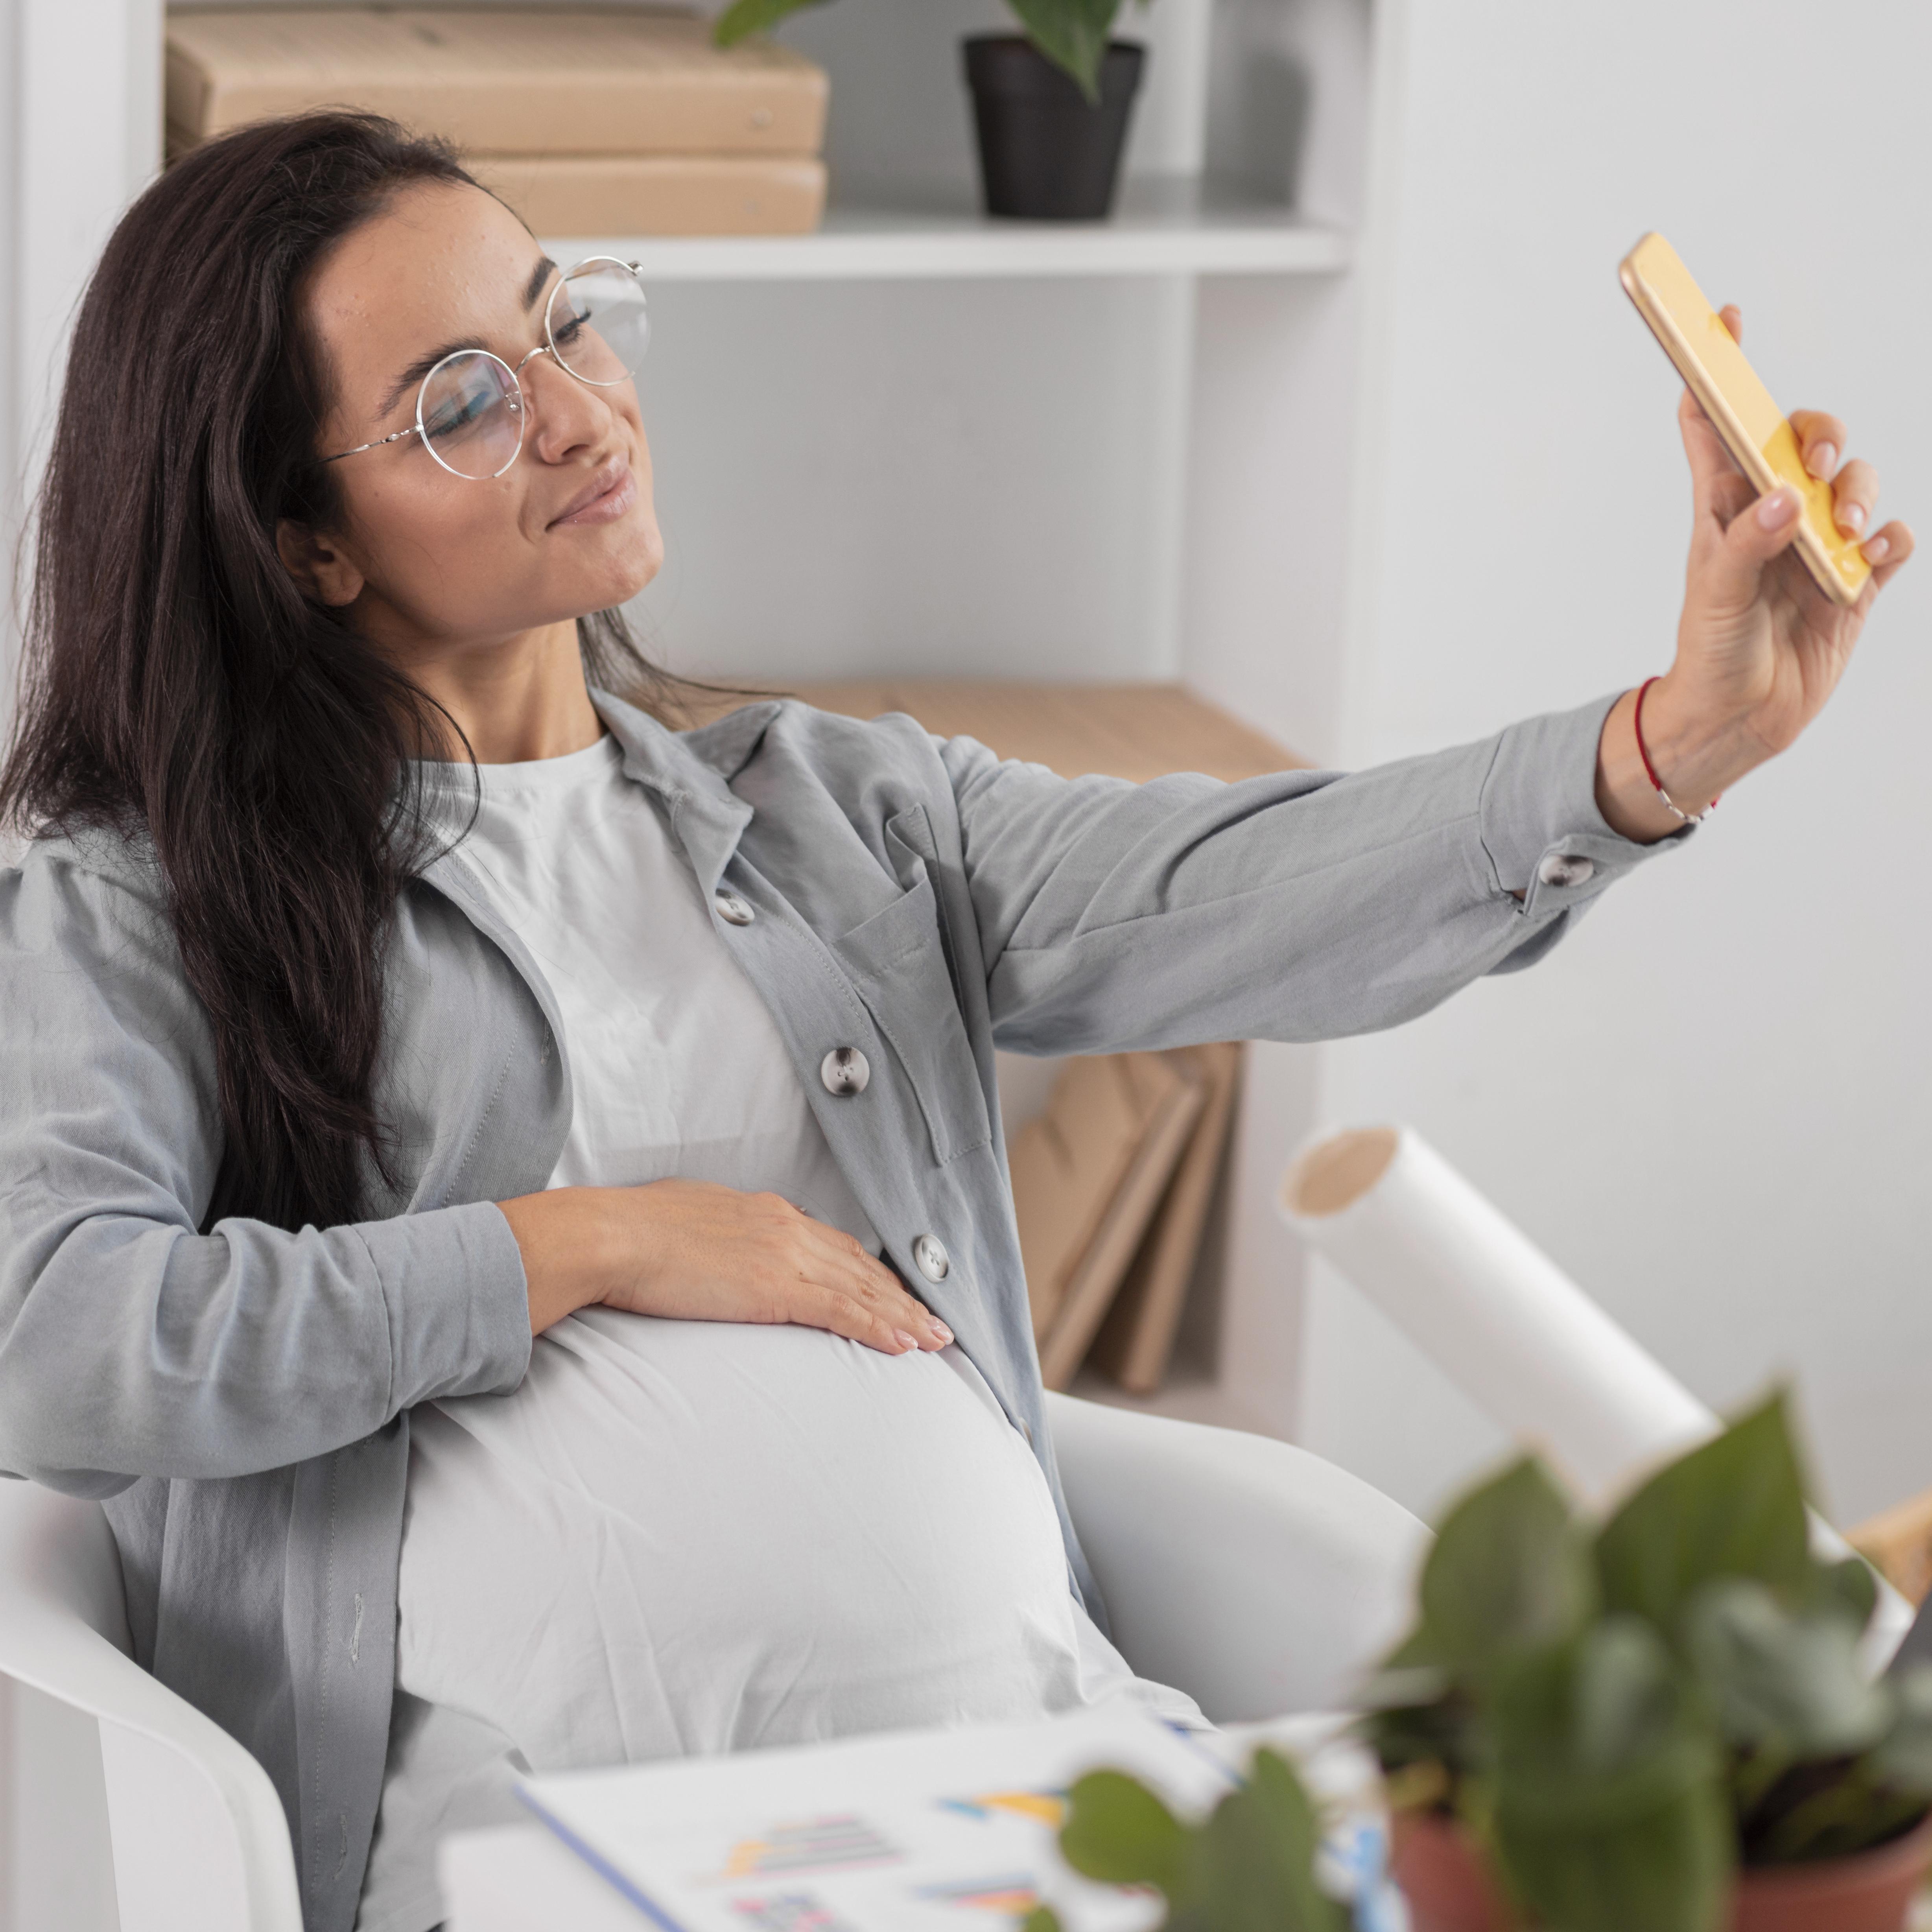 pregnant-woman-taking-selfie-home-while-working.jpg